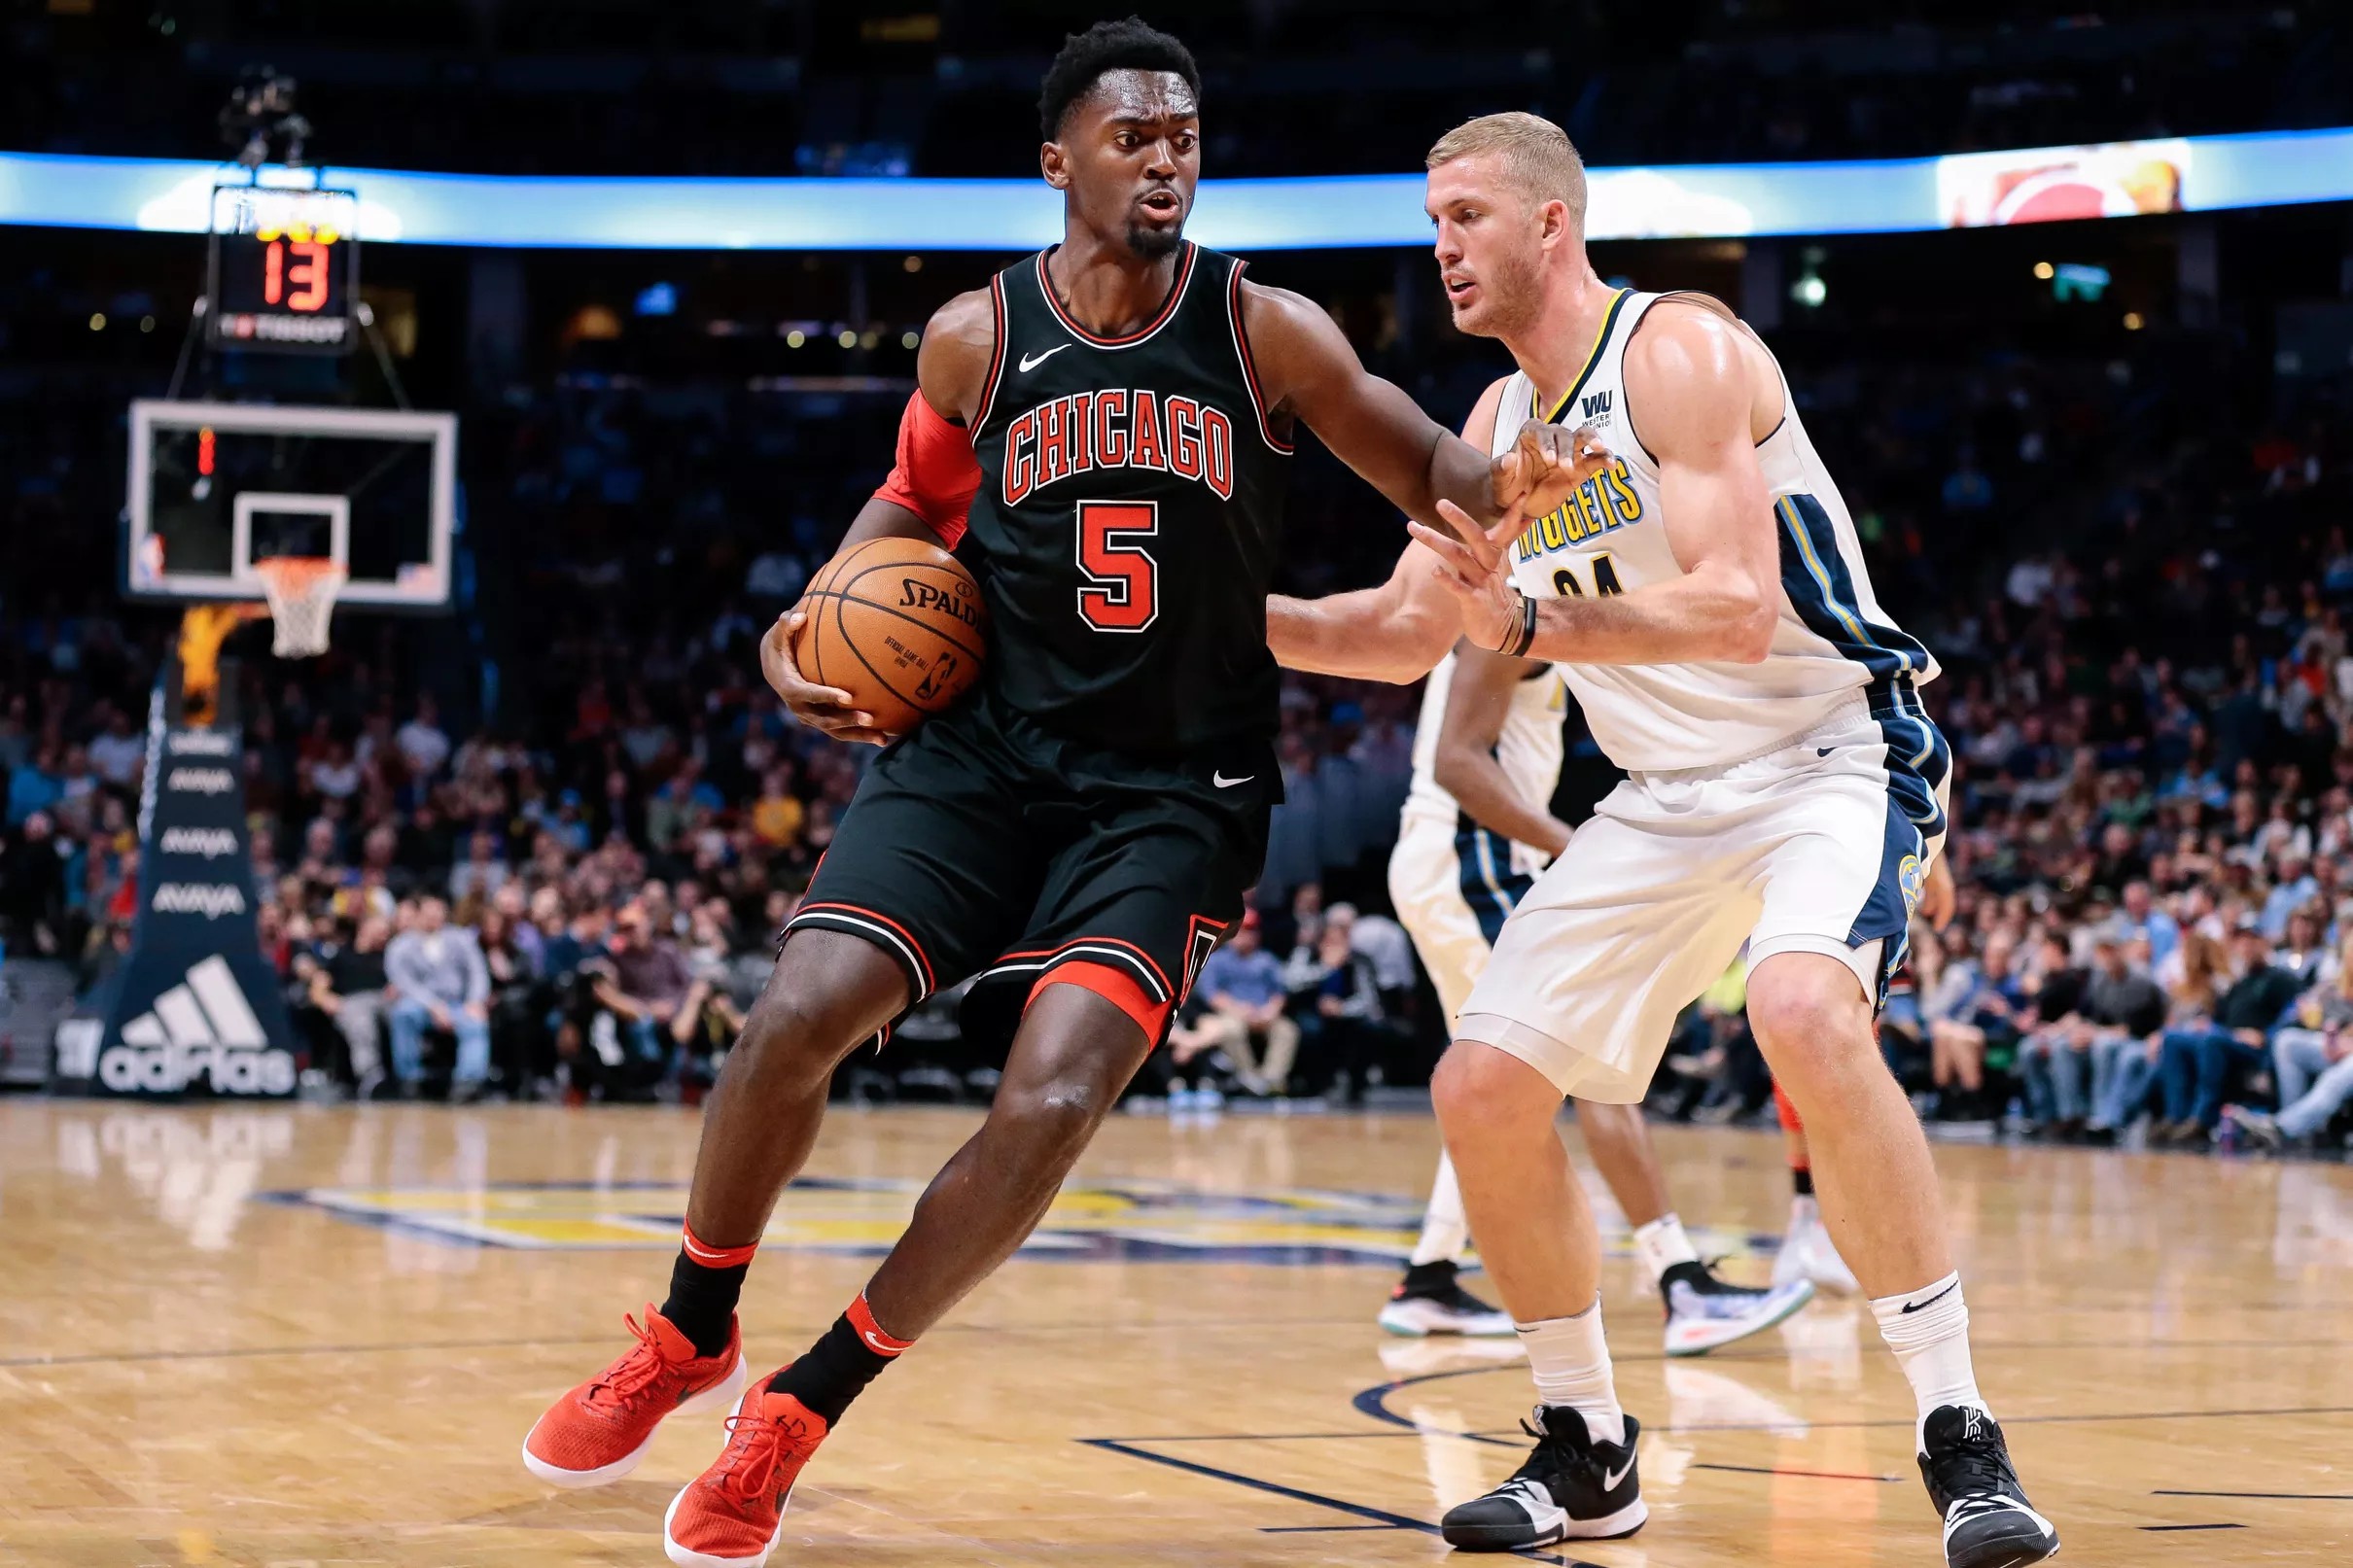 Bulls vs. Nuggets Game Preview and Open Thread